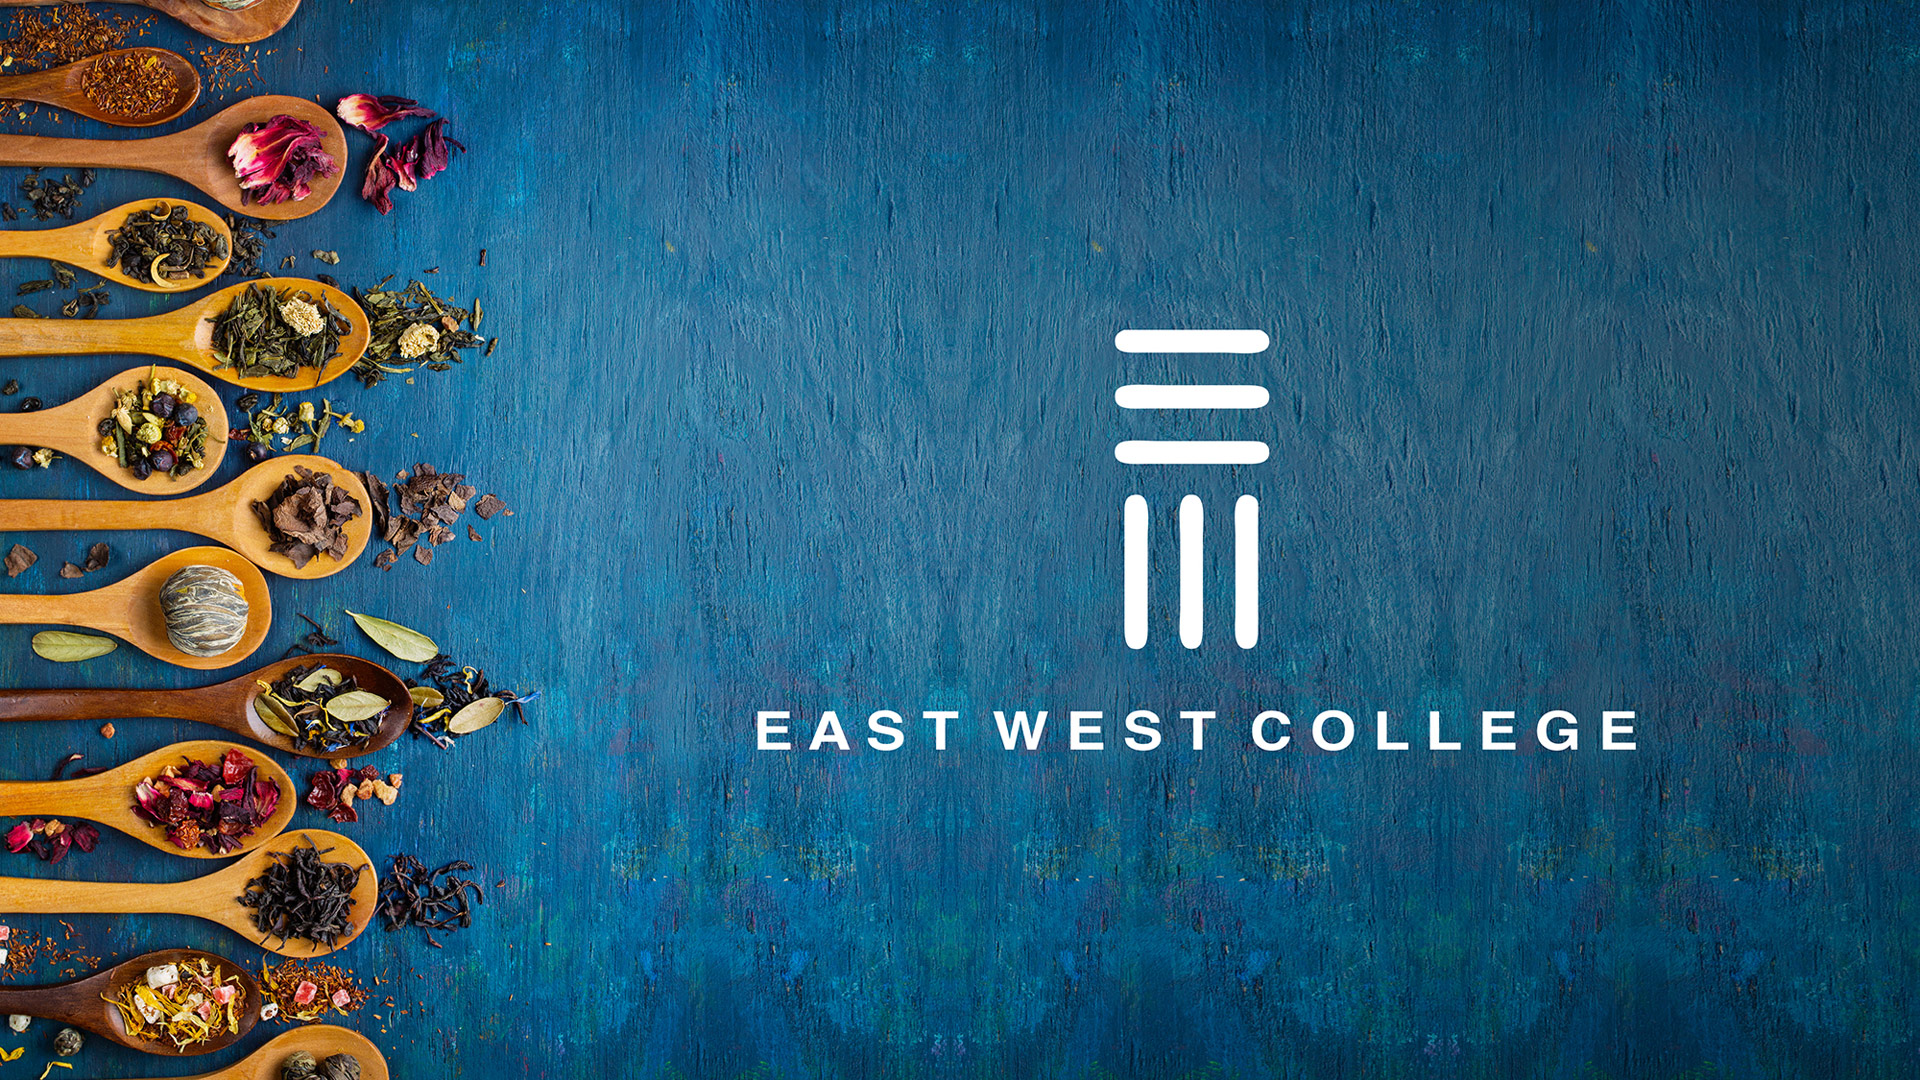 East West College